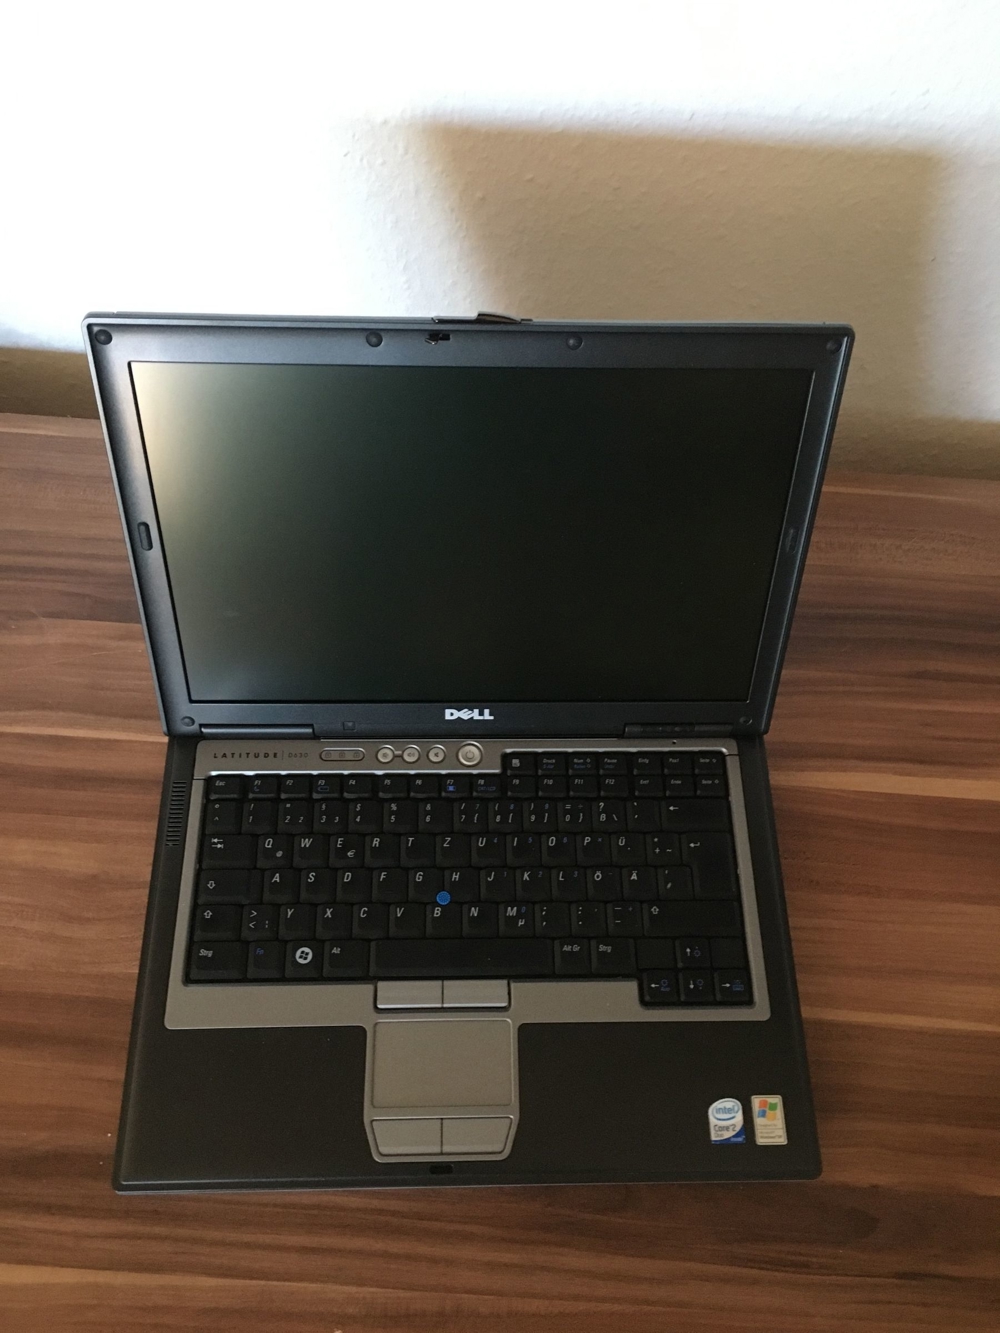 "DELL" Business NOTEBOOK, Modell: "LATITUDE D620"